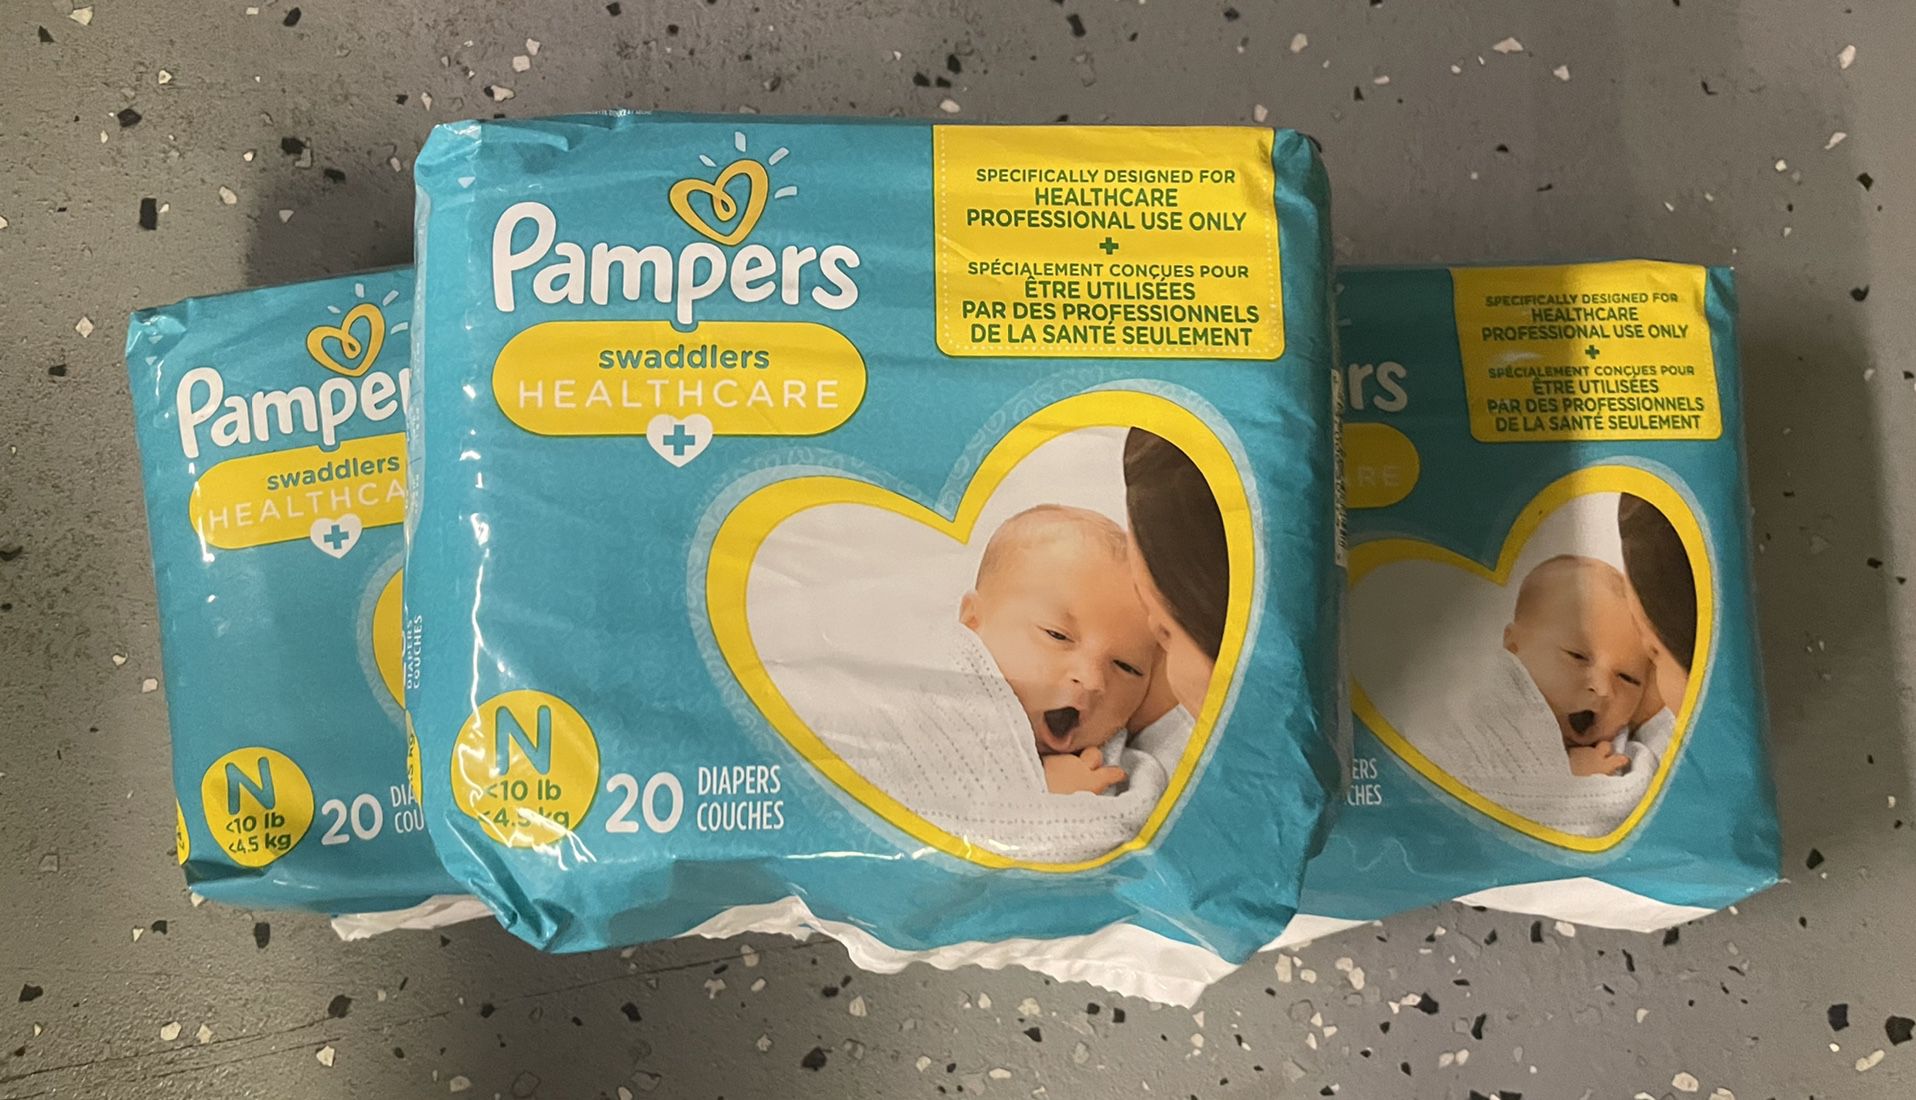 Diapers Newborn/Size 0 (< 10 lb),60 Count - Pampers Swaddlers Disposable Baby Diapers,